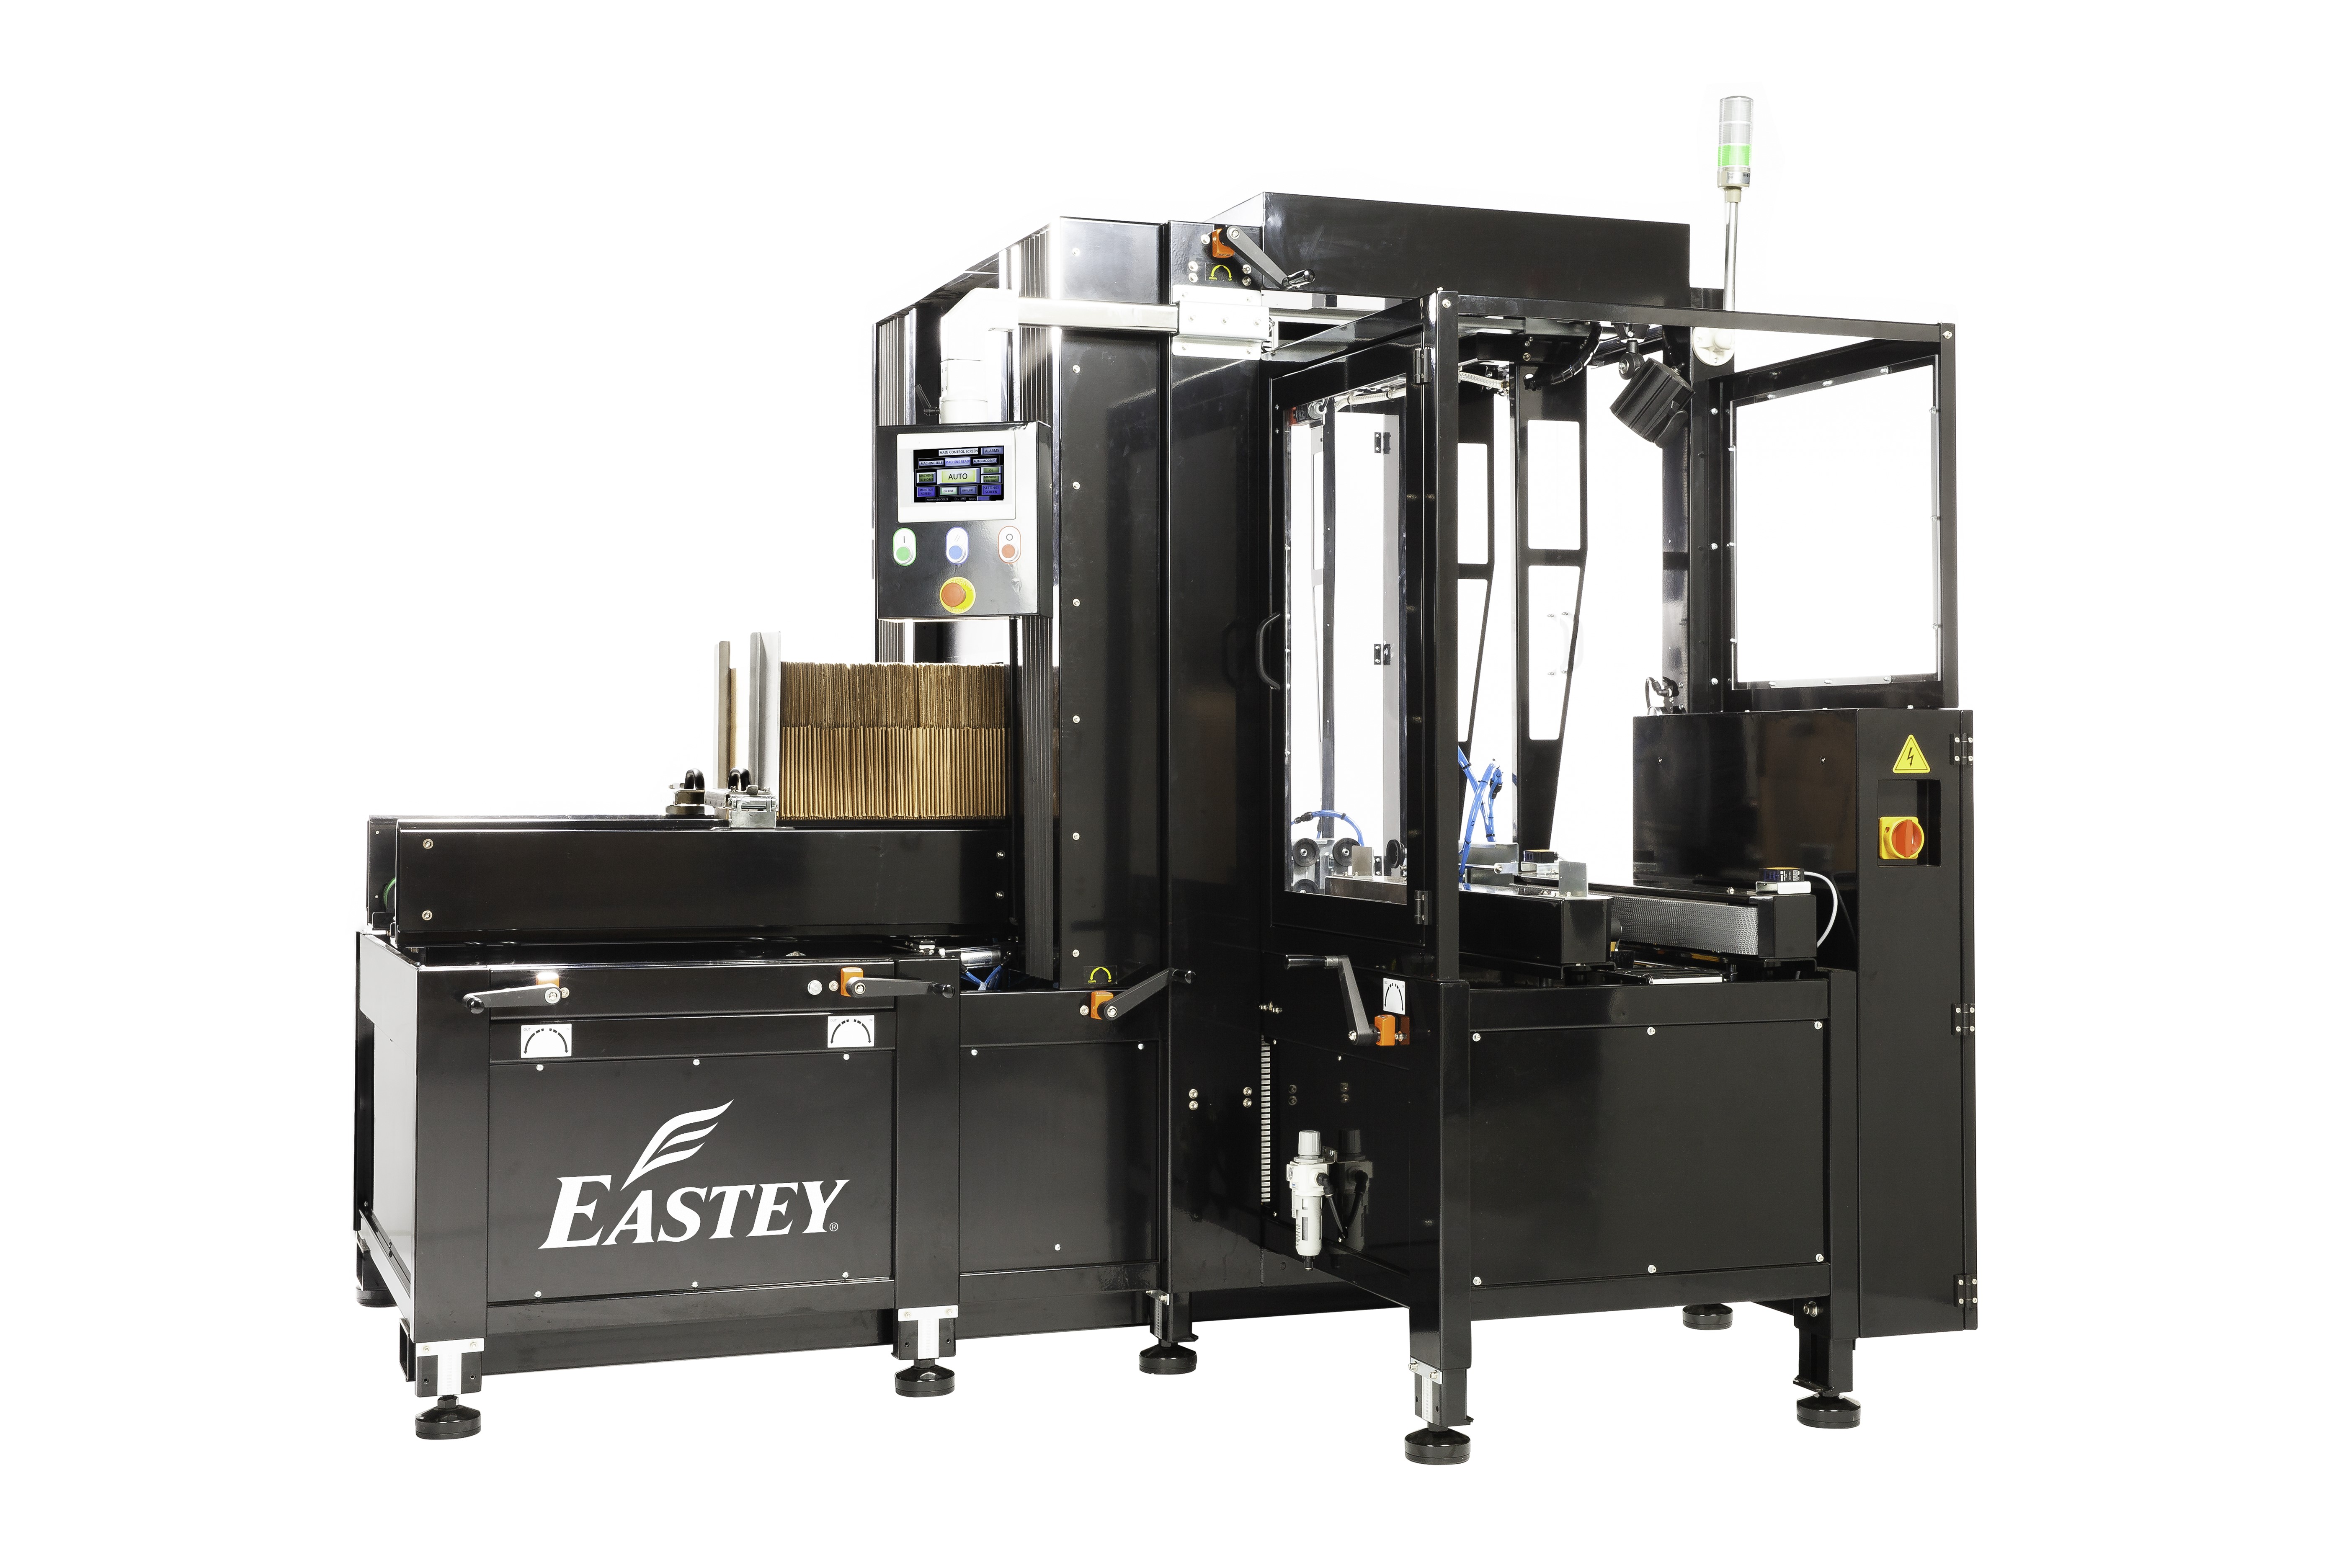 The ERX-15 Automatic Case Erector from Eastey